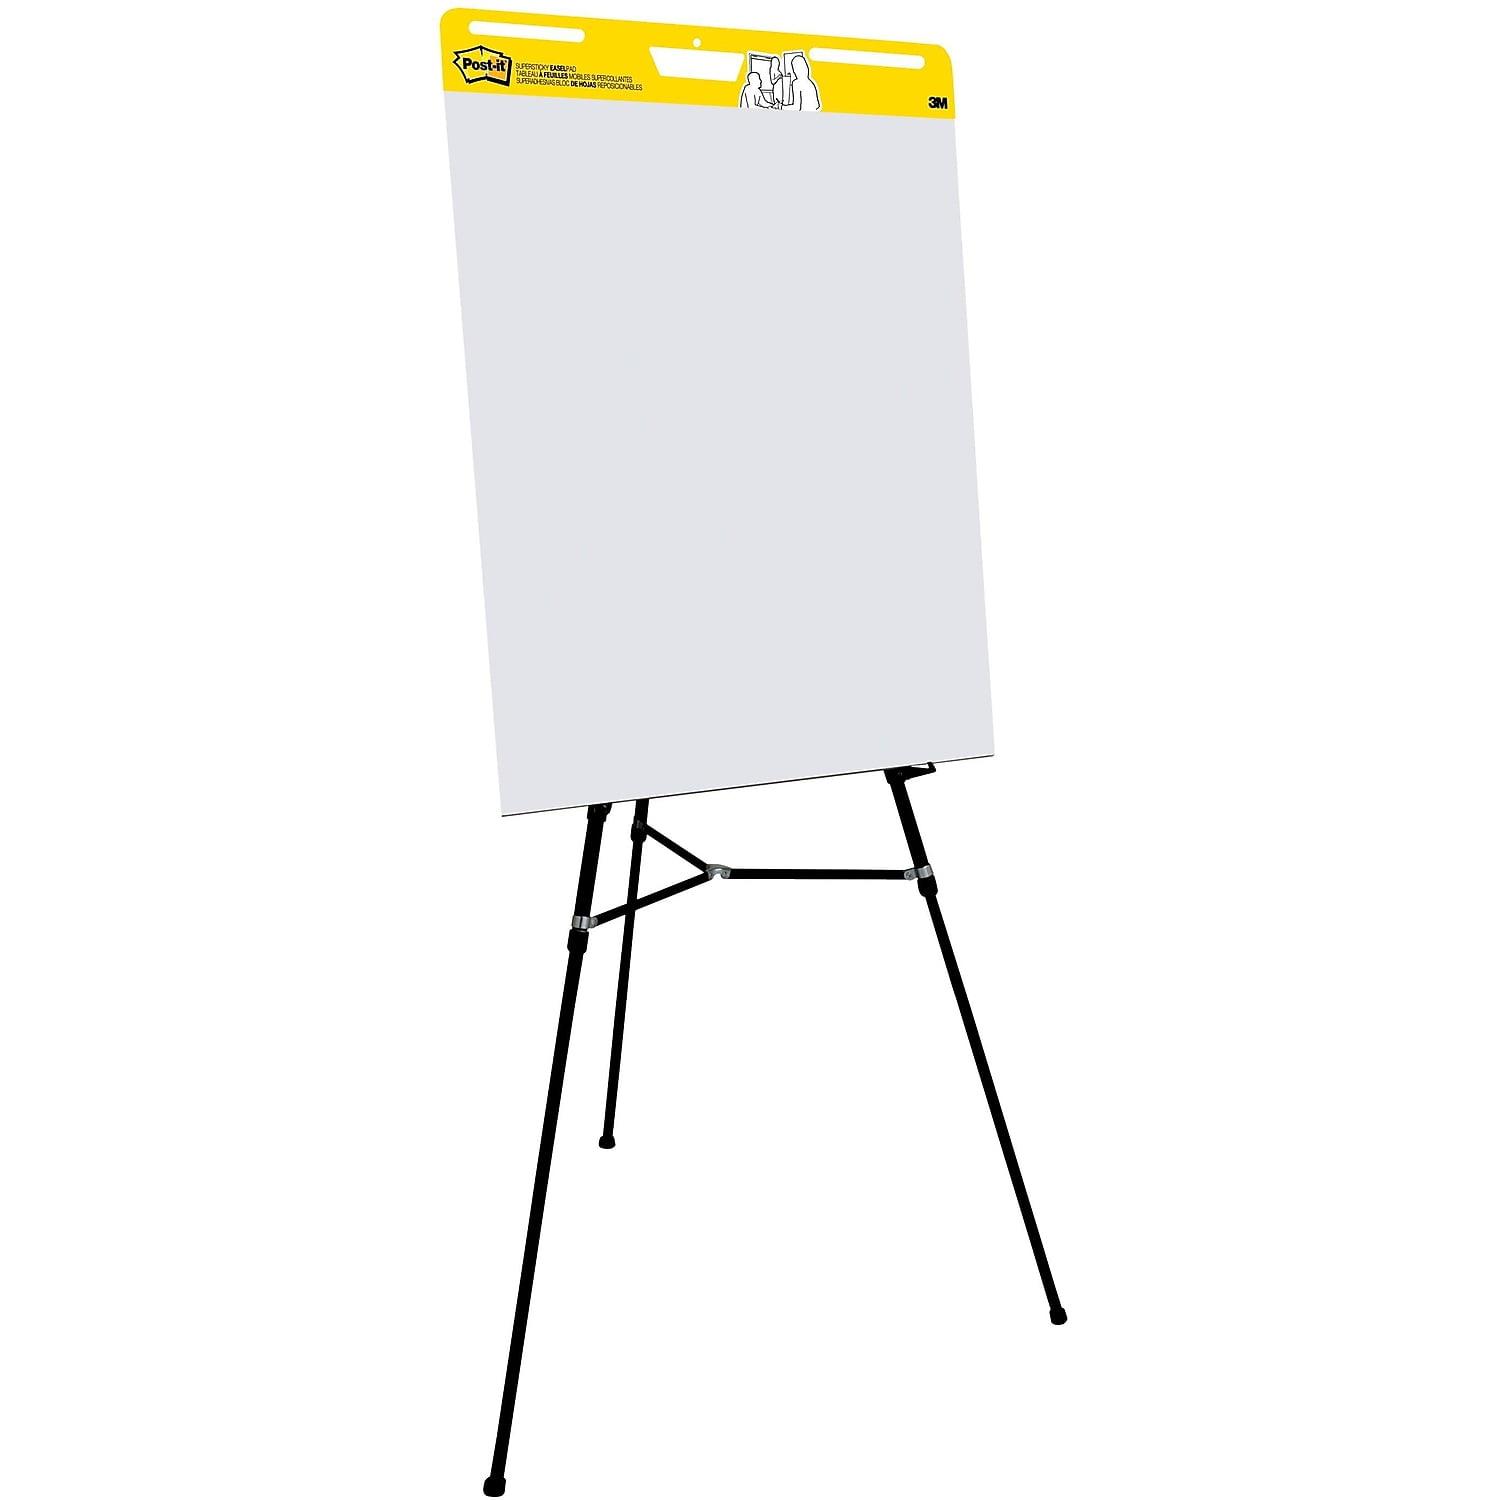 Buy Post-it 25 x 30 White Self-Stick Easel Pad with Grid Lines - 4 Pads  (MMM560VAD4PK)